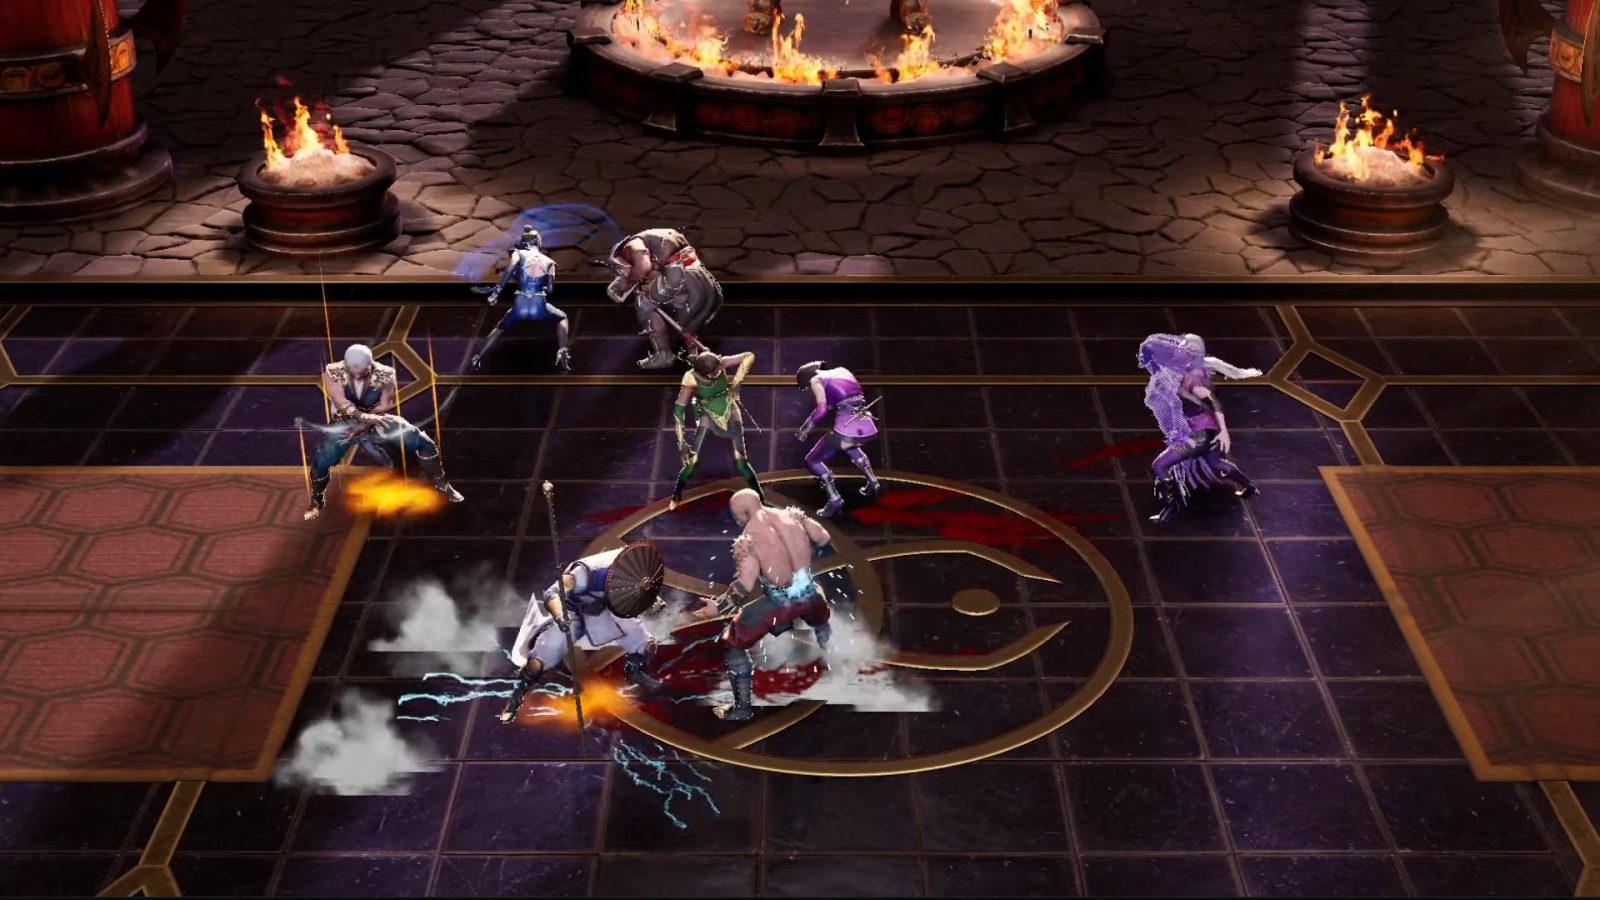 Mortal Kombat: Onslaught free-to-play RPG game for Android and iOS released  globally